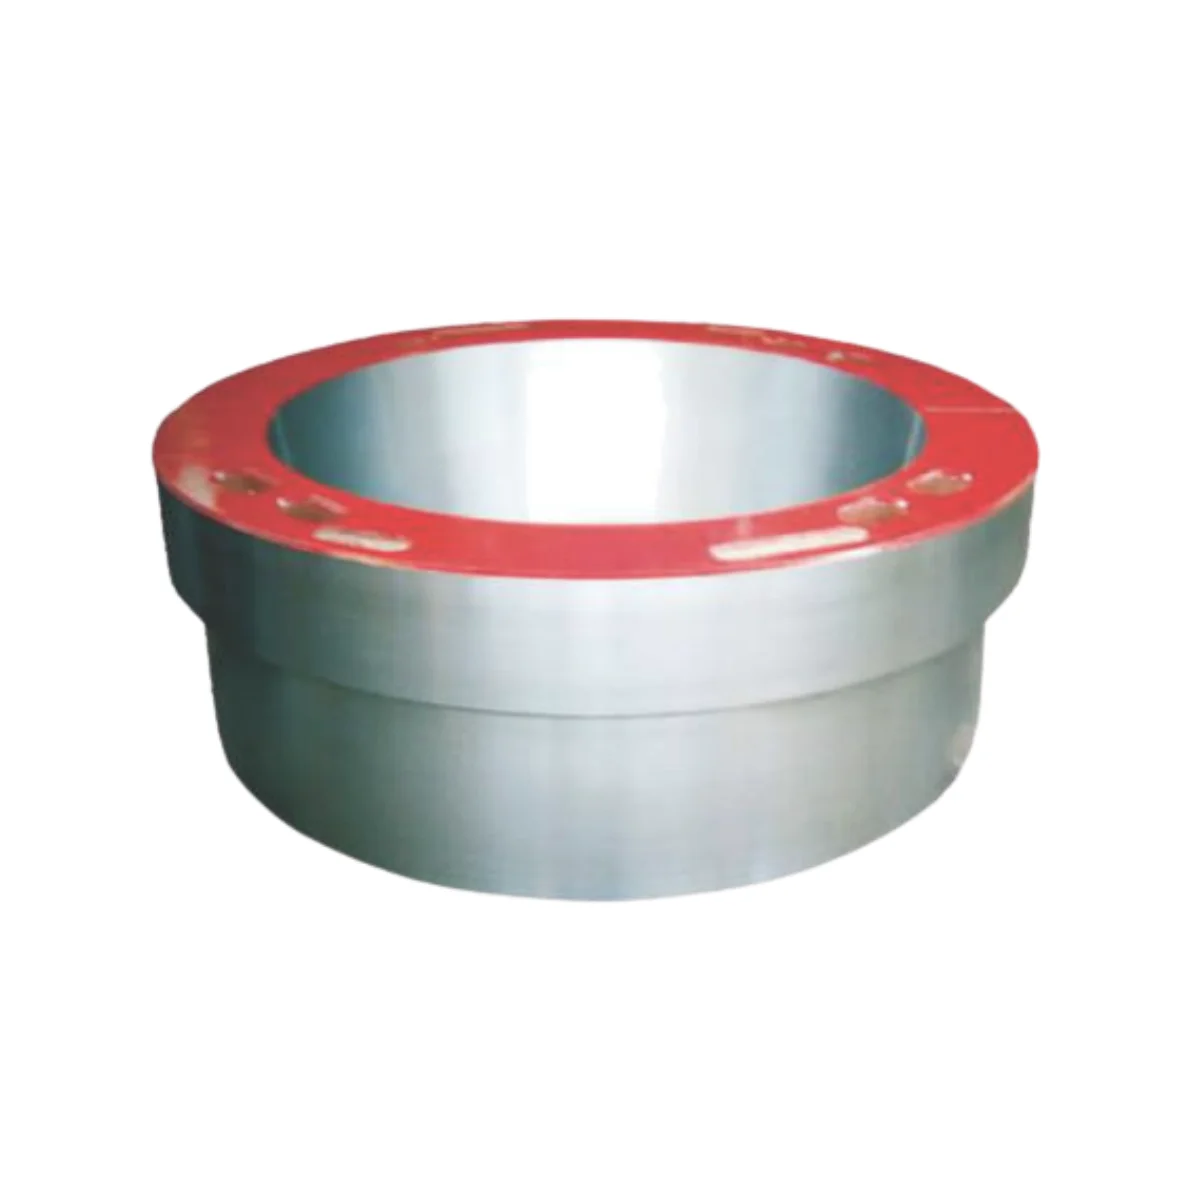 Round casing bushings from NOV, Varco, DenCon, Forum, Bvm, Bv, and Rutong ensure stable drilling with options for standard and 37.5-inch sizes.